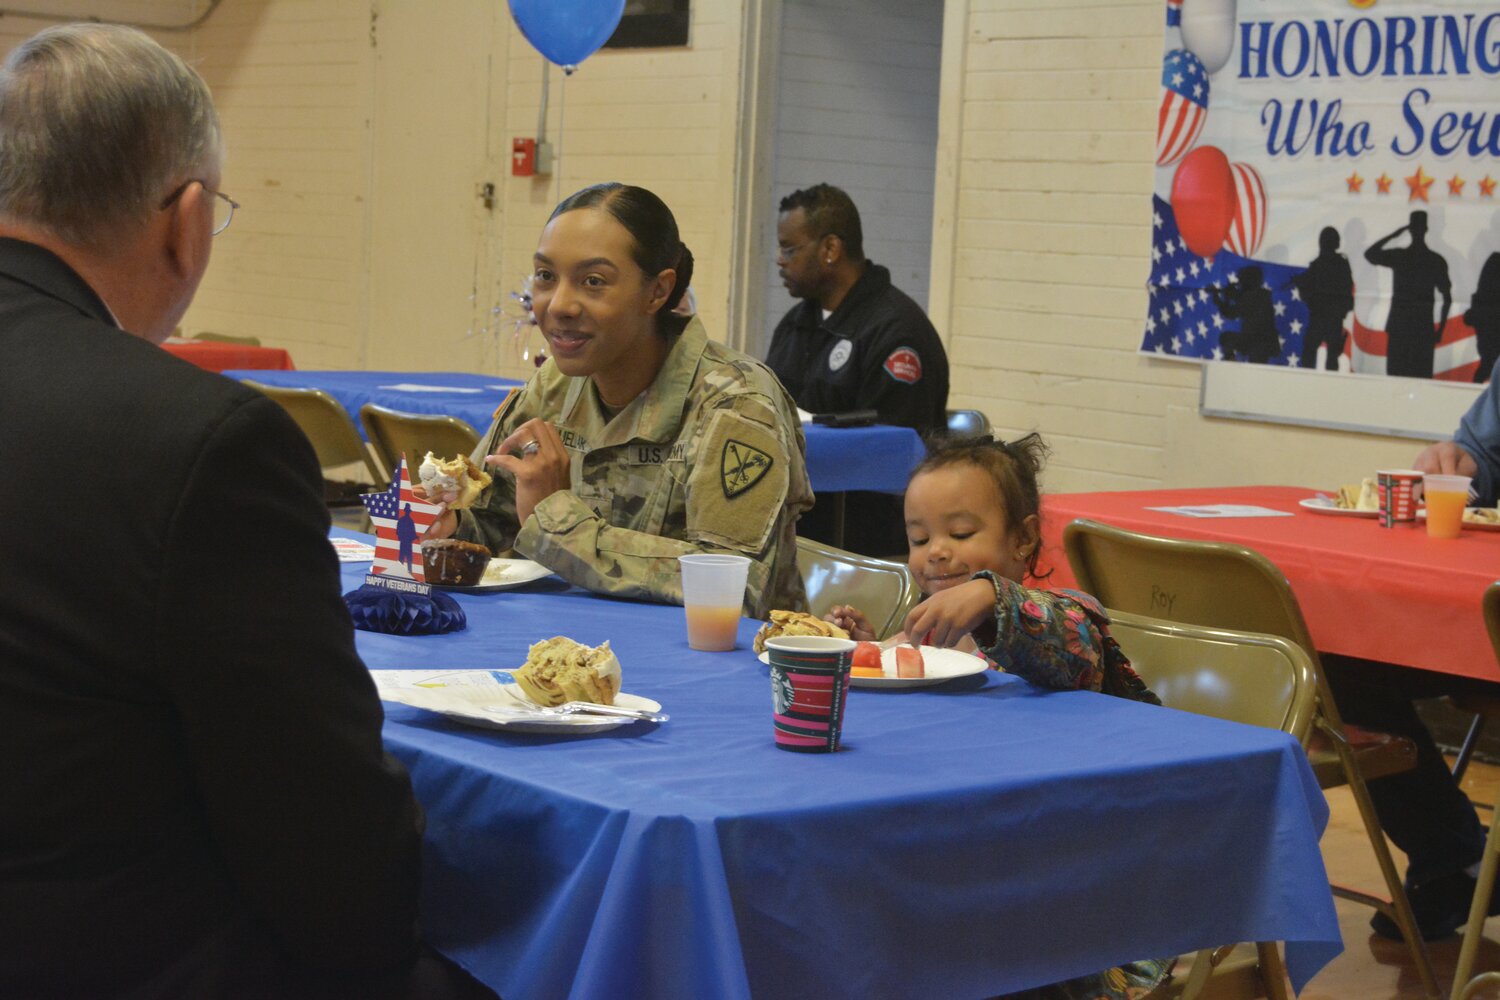 A member of the United States Army and her family enjoy breakfast at Roy Elementary School on Nov. 9.